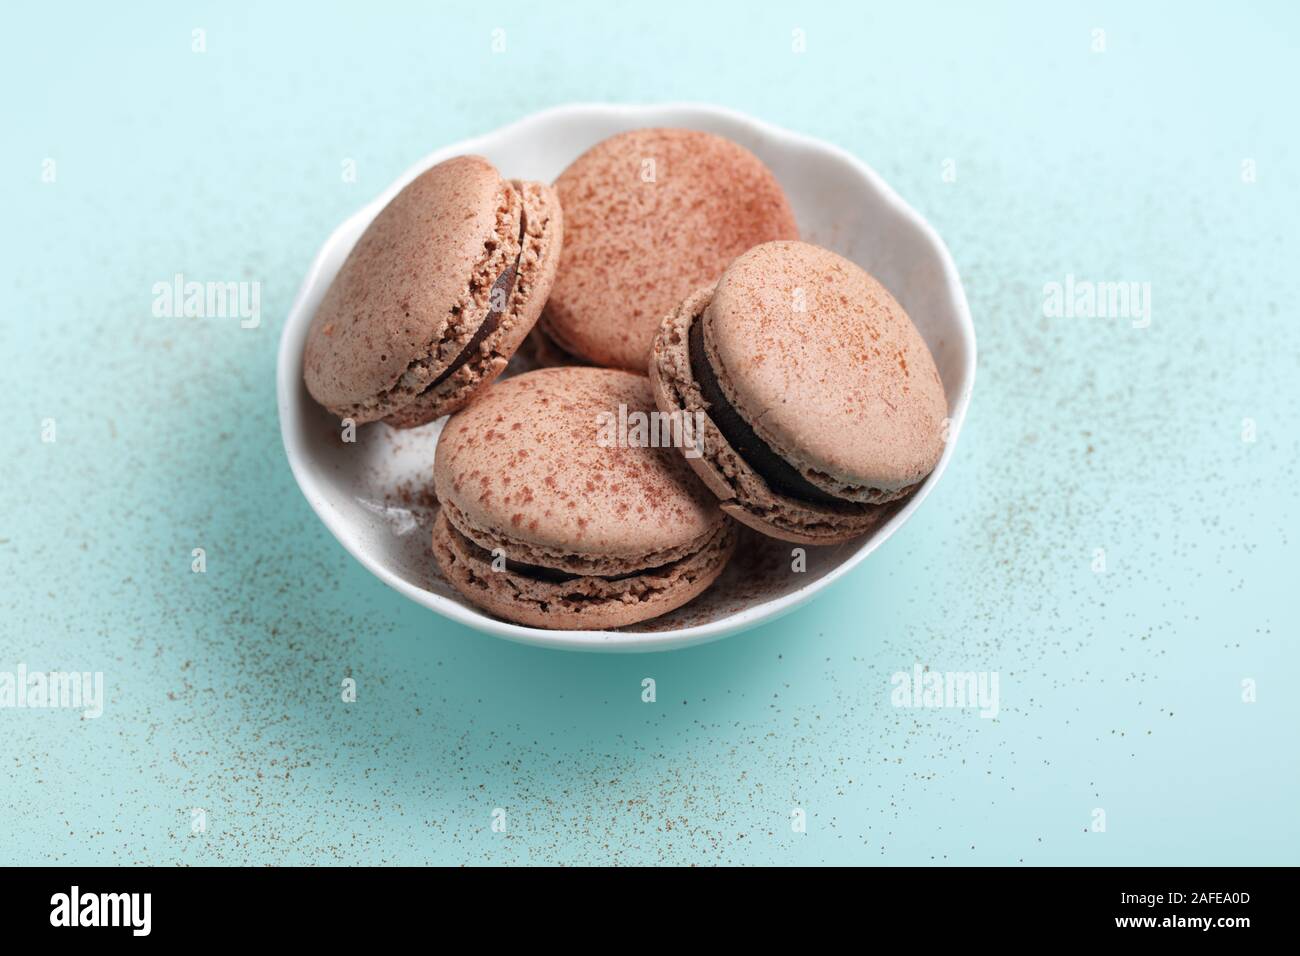 Four chocolate macarons confections against cyan background Stock Photo